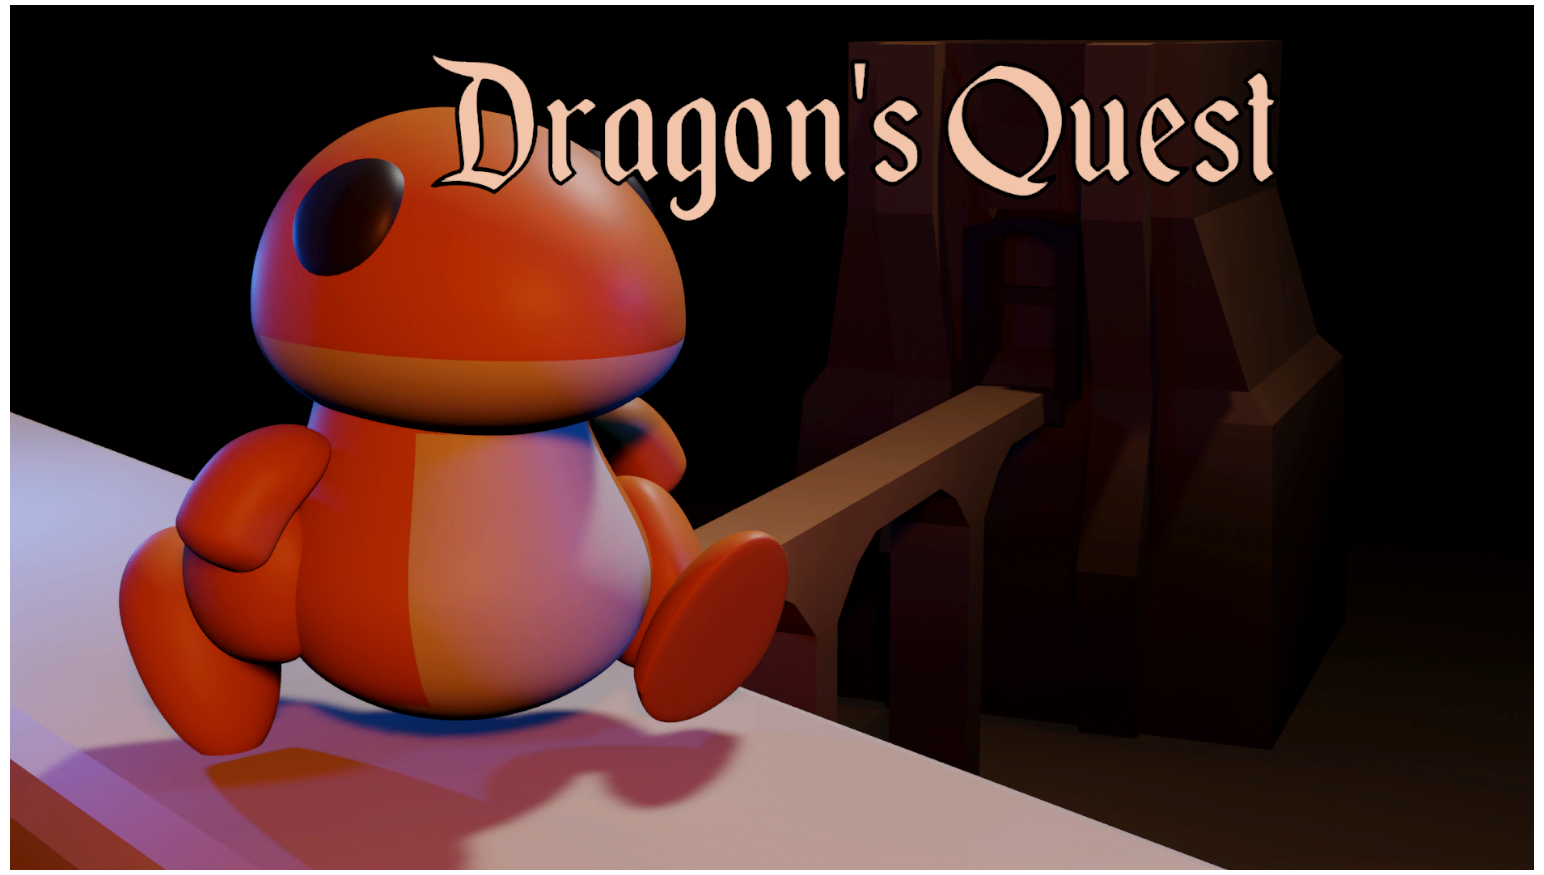 Dragon's Quest by jeff@redopticgames for Metroidvania Month 14